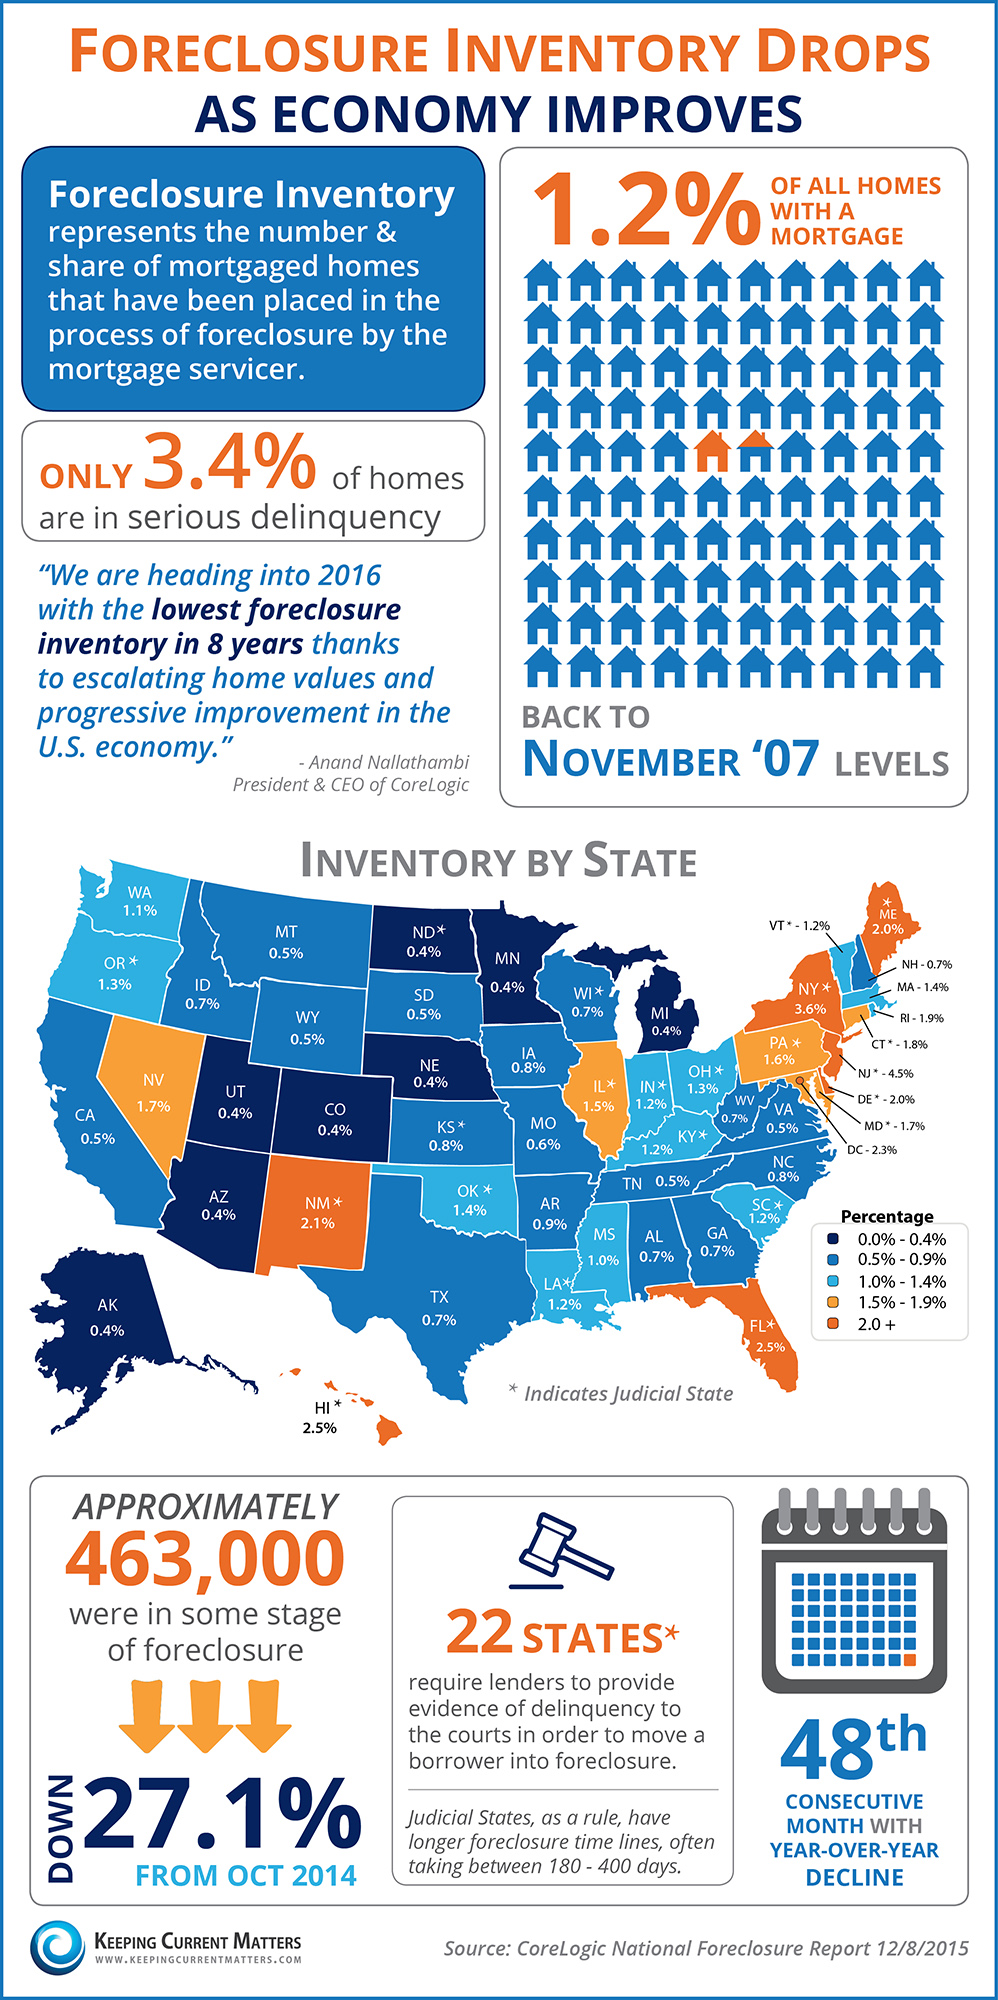 Foreclosure Inventory Drops As Economy Improves [INFOGRAPHIC] | Keeping Current Matters